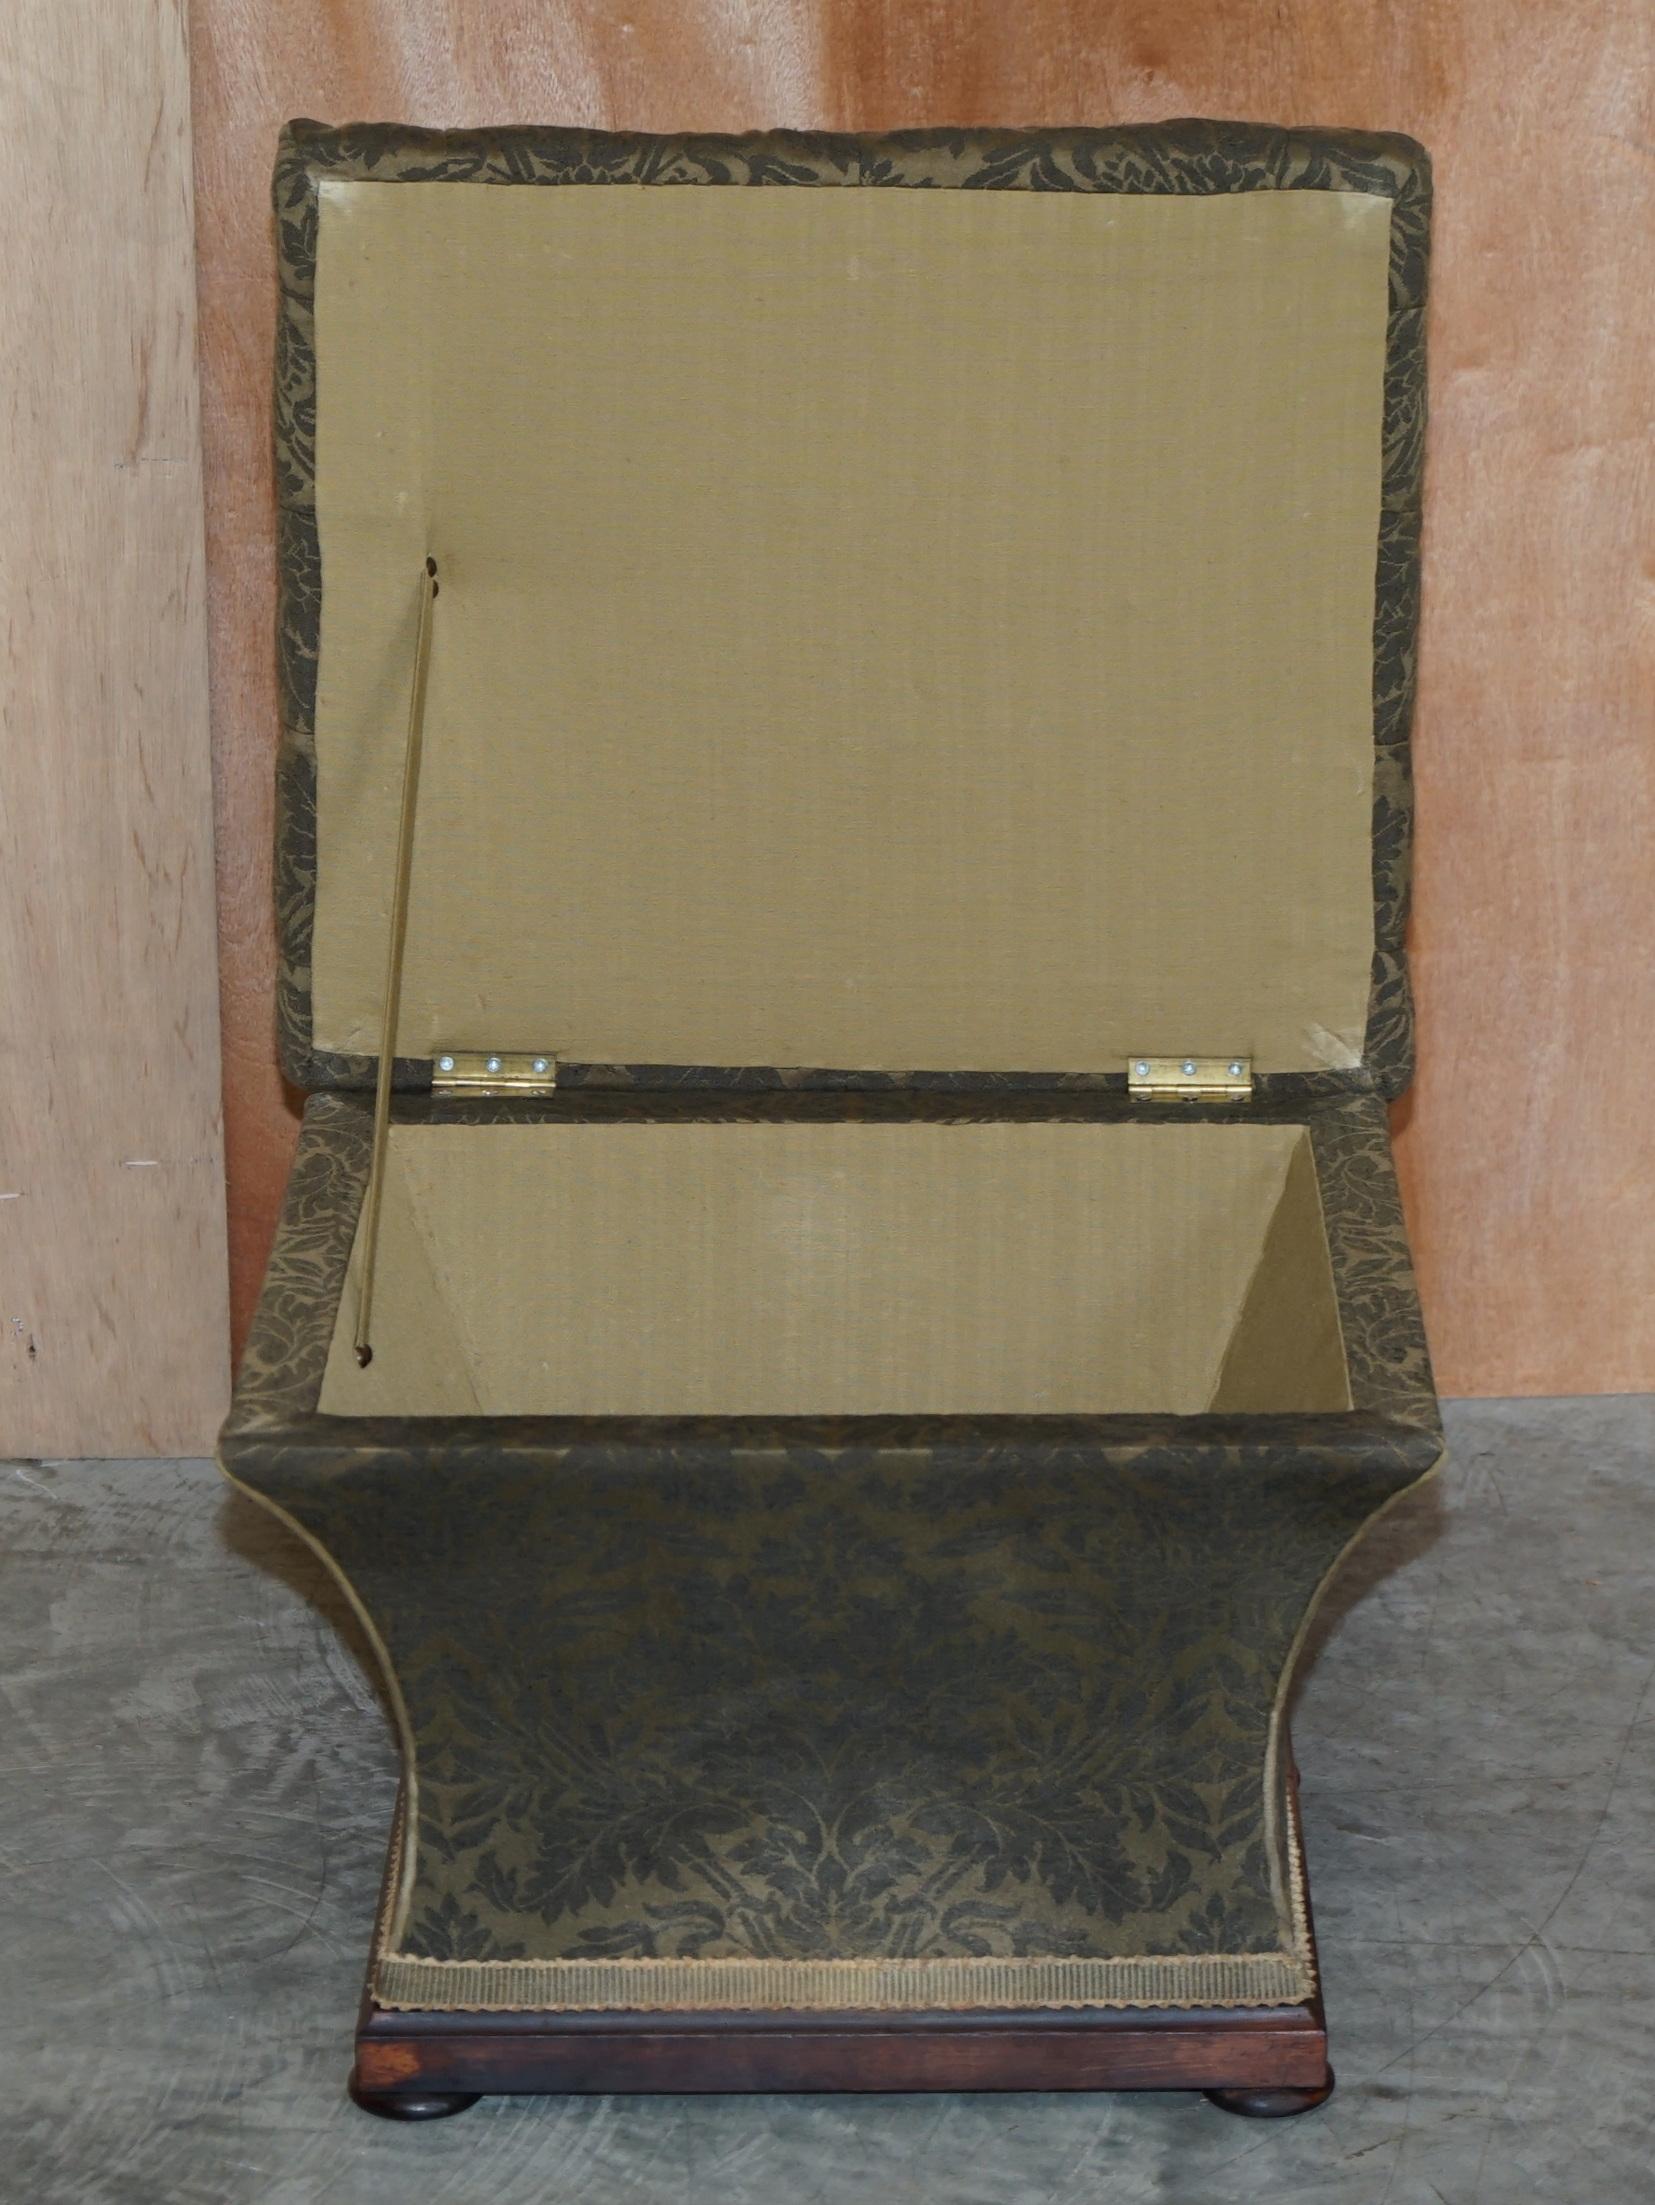 Exquisite Upholstered Victorian circa 1860 Ottoman Stool Footstool with Storage For Sale 3